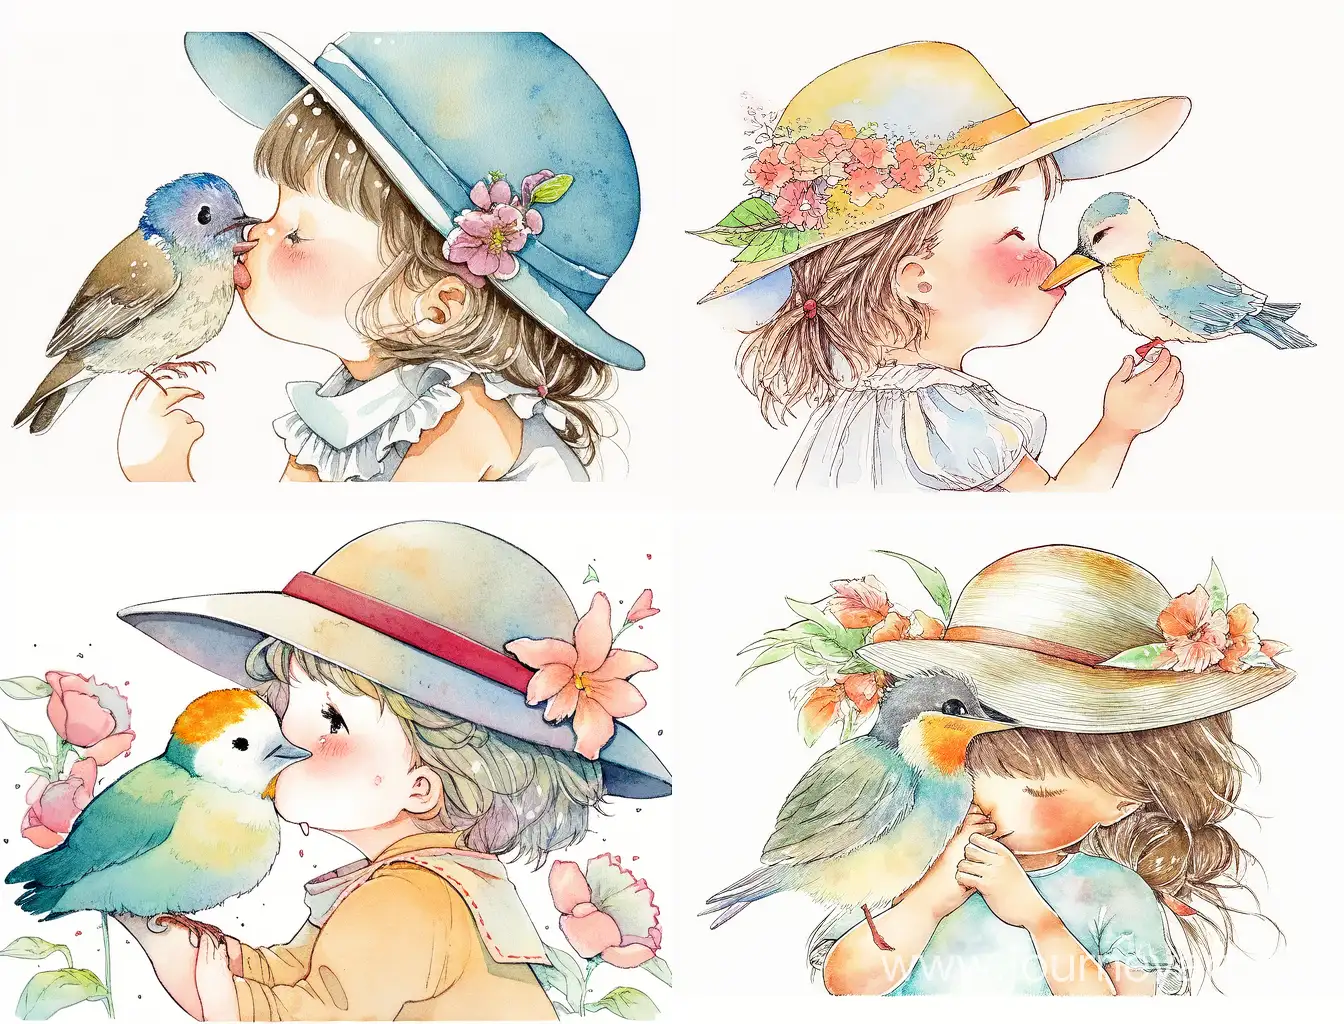 Adorable little girl with big hat kissing a cute bird, cute, vintage, whimsical, pastel color, soft colors, watercolor, by Sarah Kay, white background